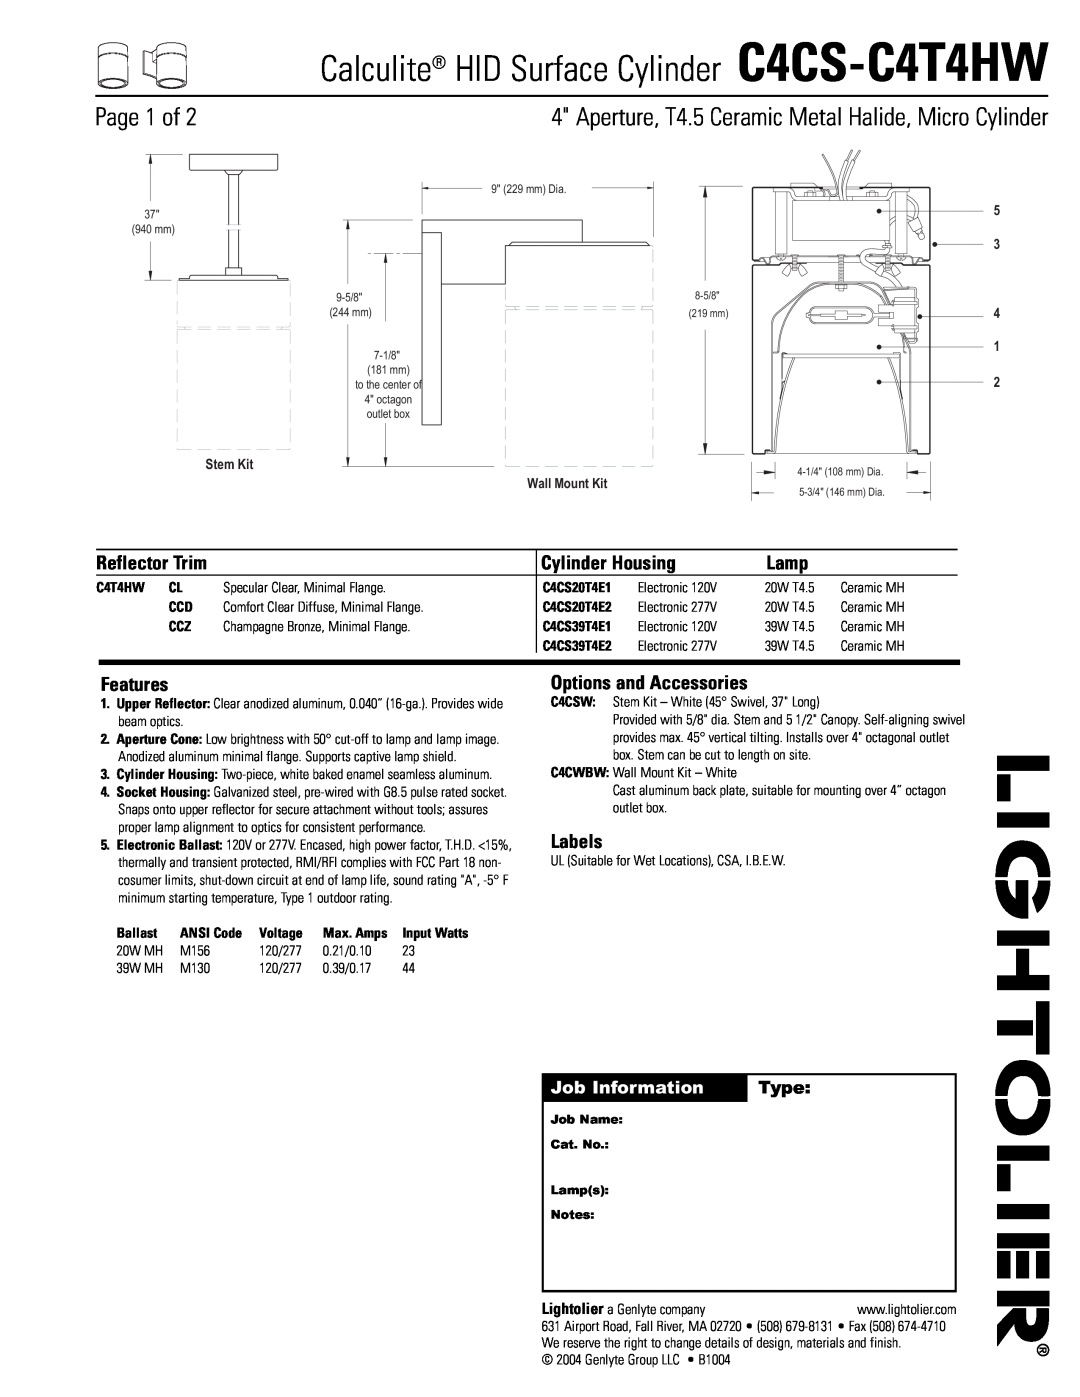 Lightolier manual Page 1 of, Job Information, Type, Calculite HID Surface Cylinder C4CS-C4T4HW, Cylinder Housing, Lamp 